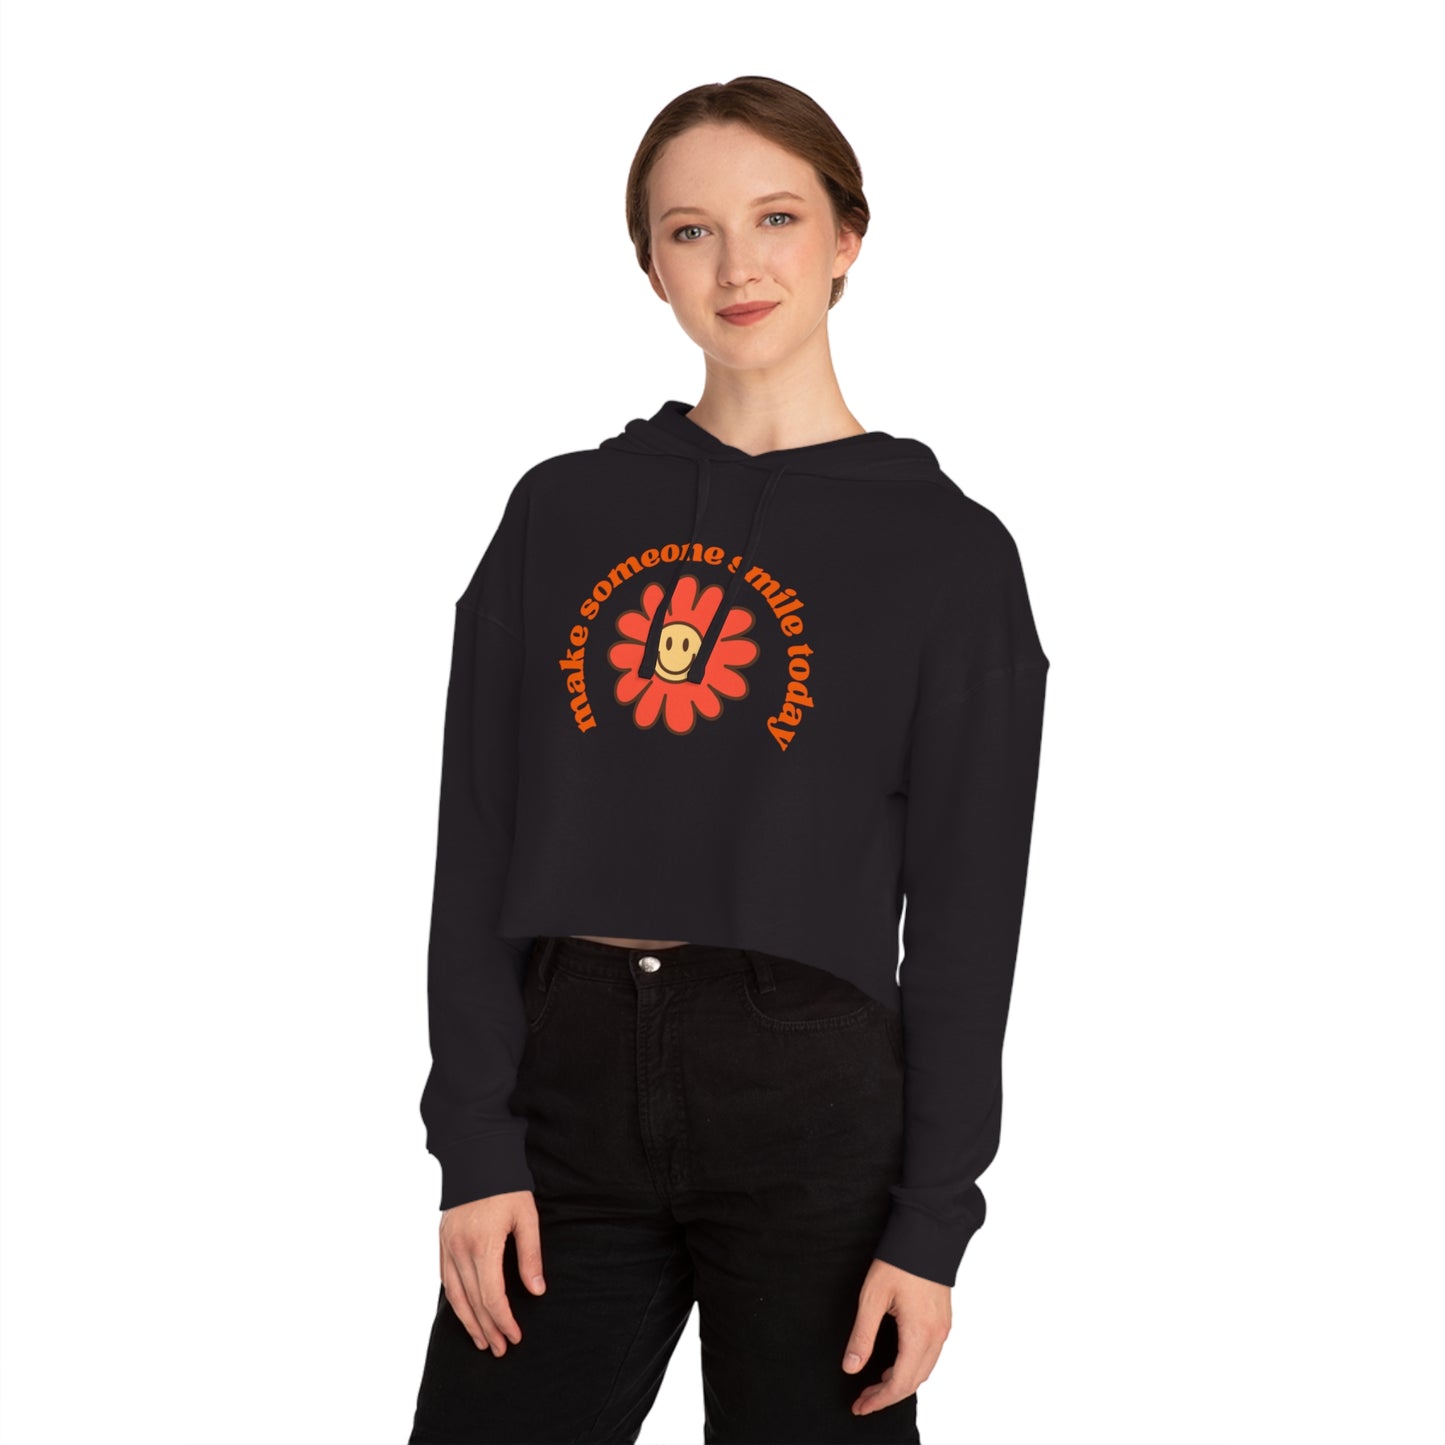 Bright flower under “make someone smile today" message design on this stylish Women’s Cropped Hooded Sweatshirt for your enjoyment.